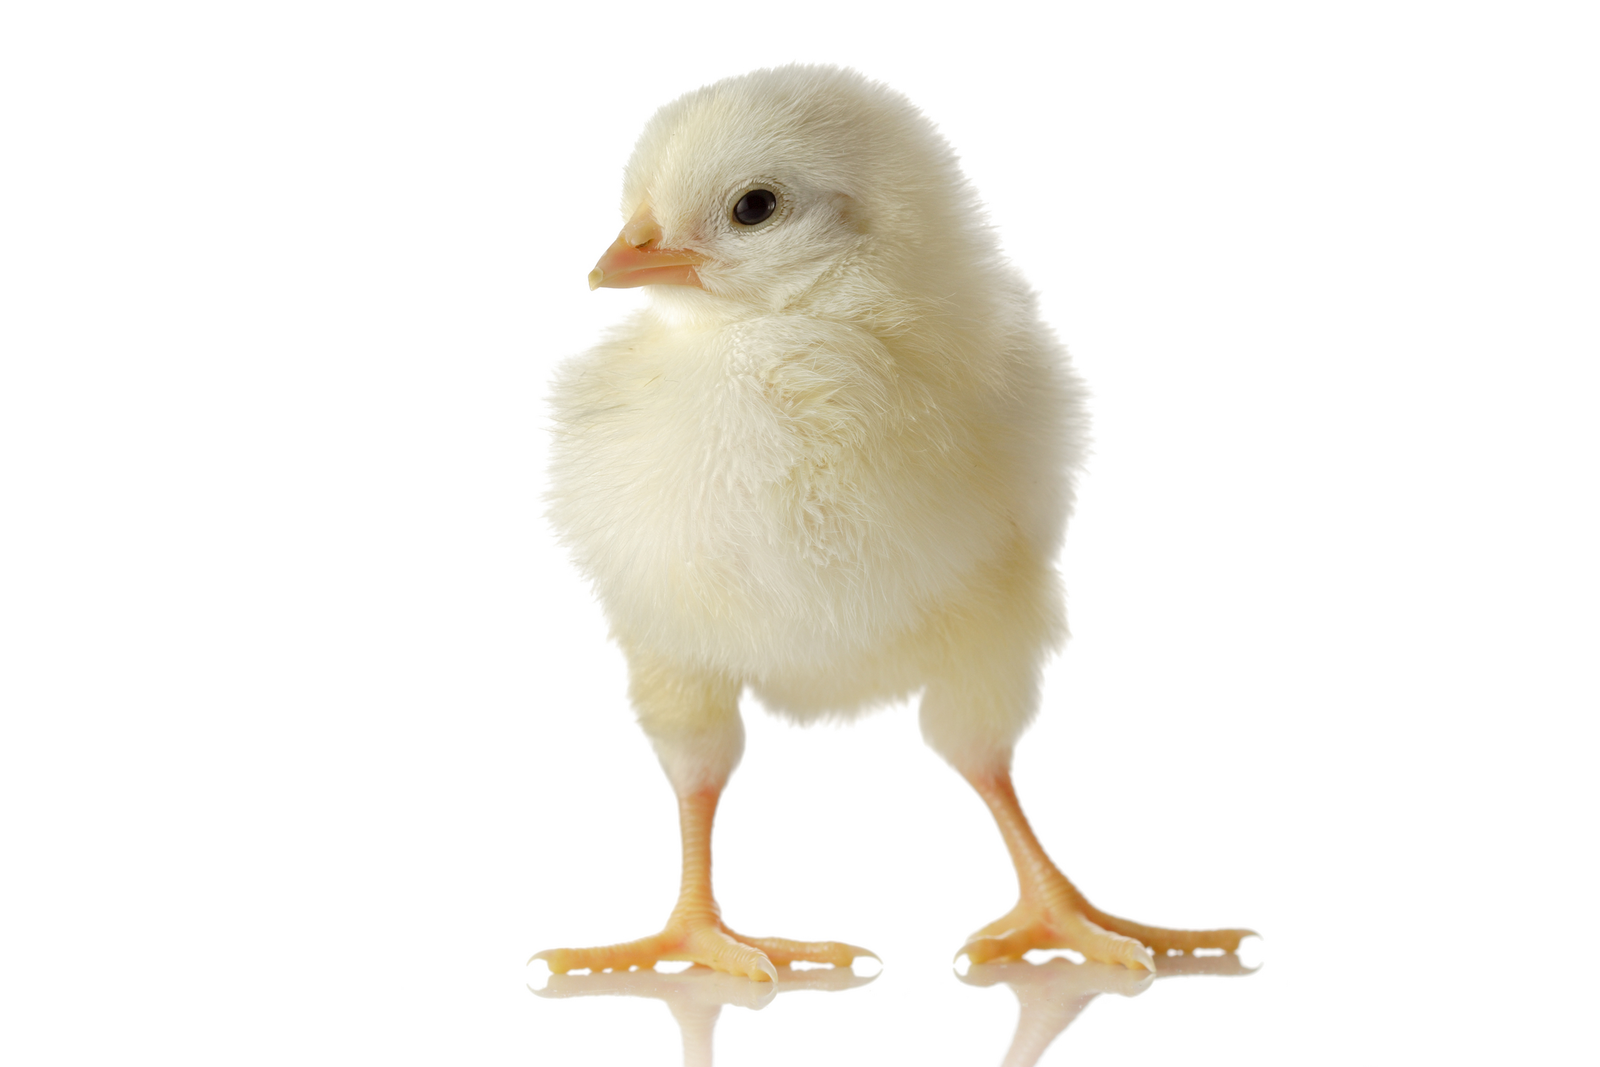 Yeast extract gives chicks a healthy start